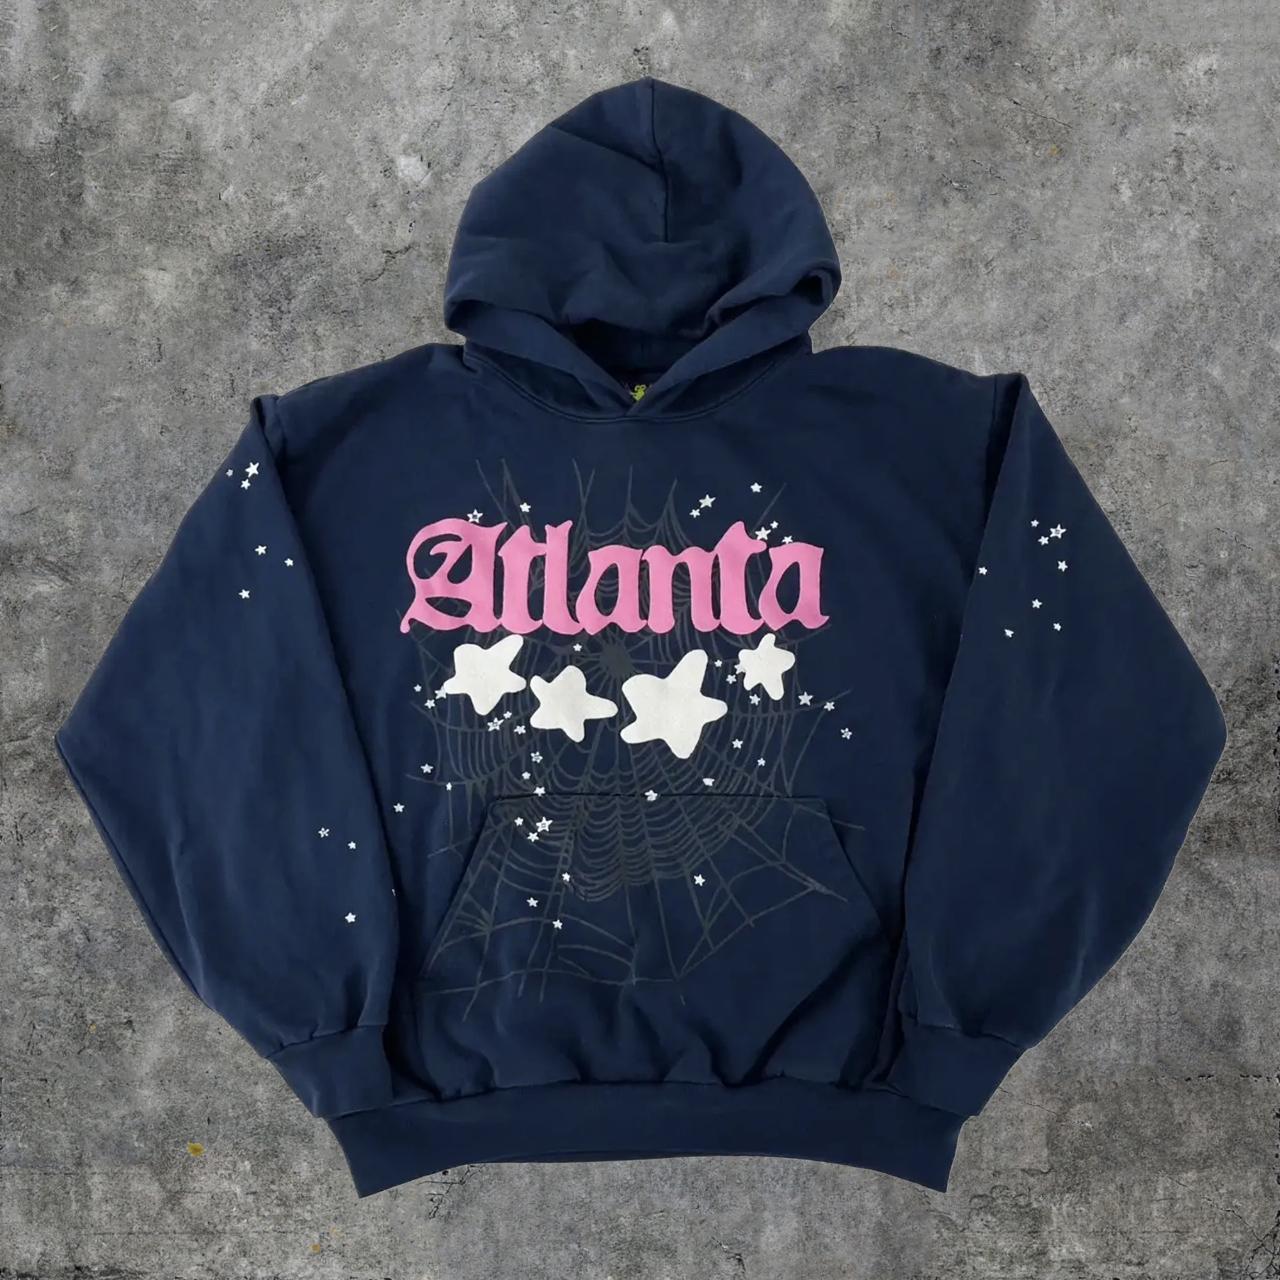 Spider Hoodies Available In-Store!! Navy Atlanta Hoodie - Size XL